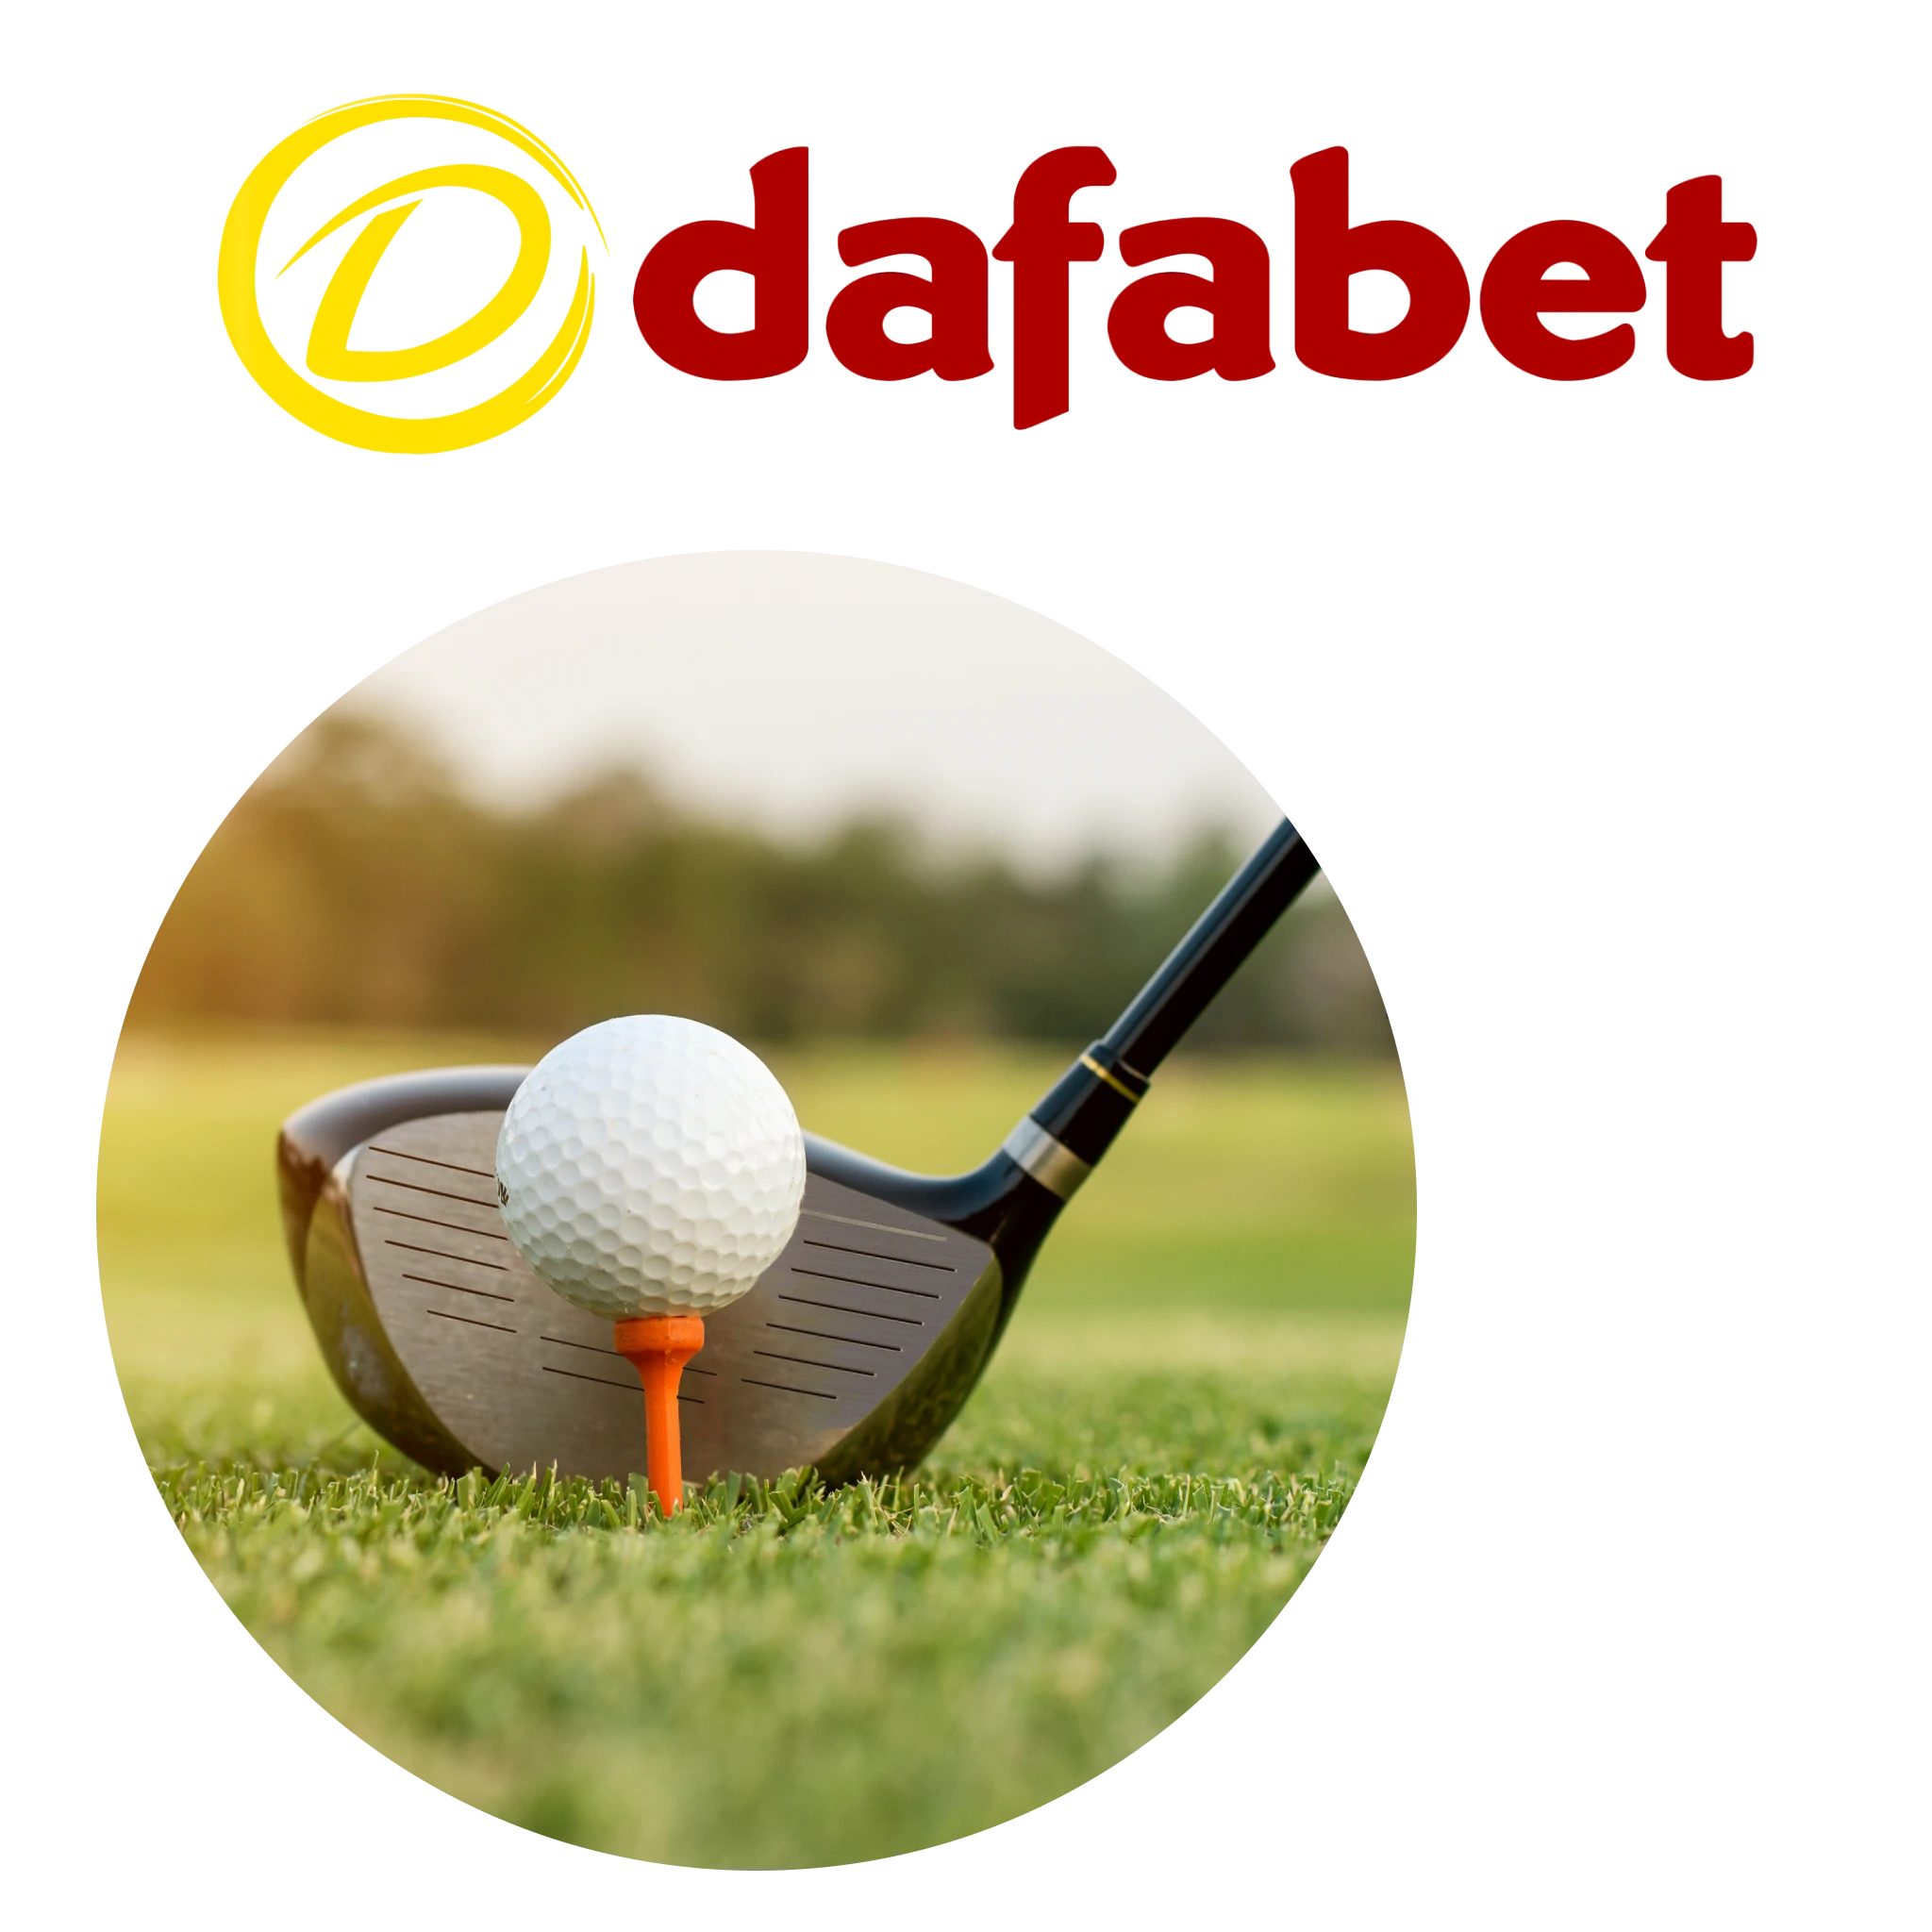 Thanks to the app of Dafabet, your golf bets will be quite enjoyable and profitable, so make sure to try them out.